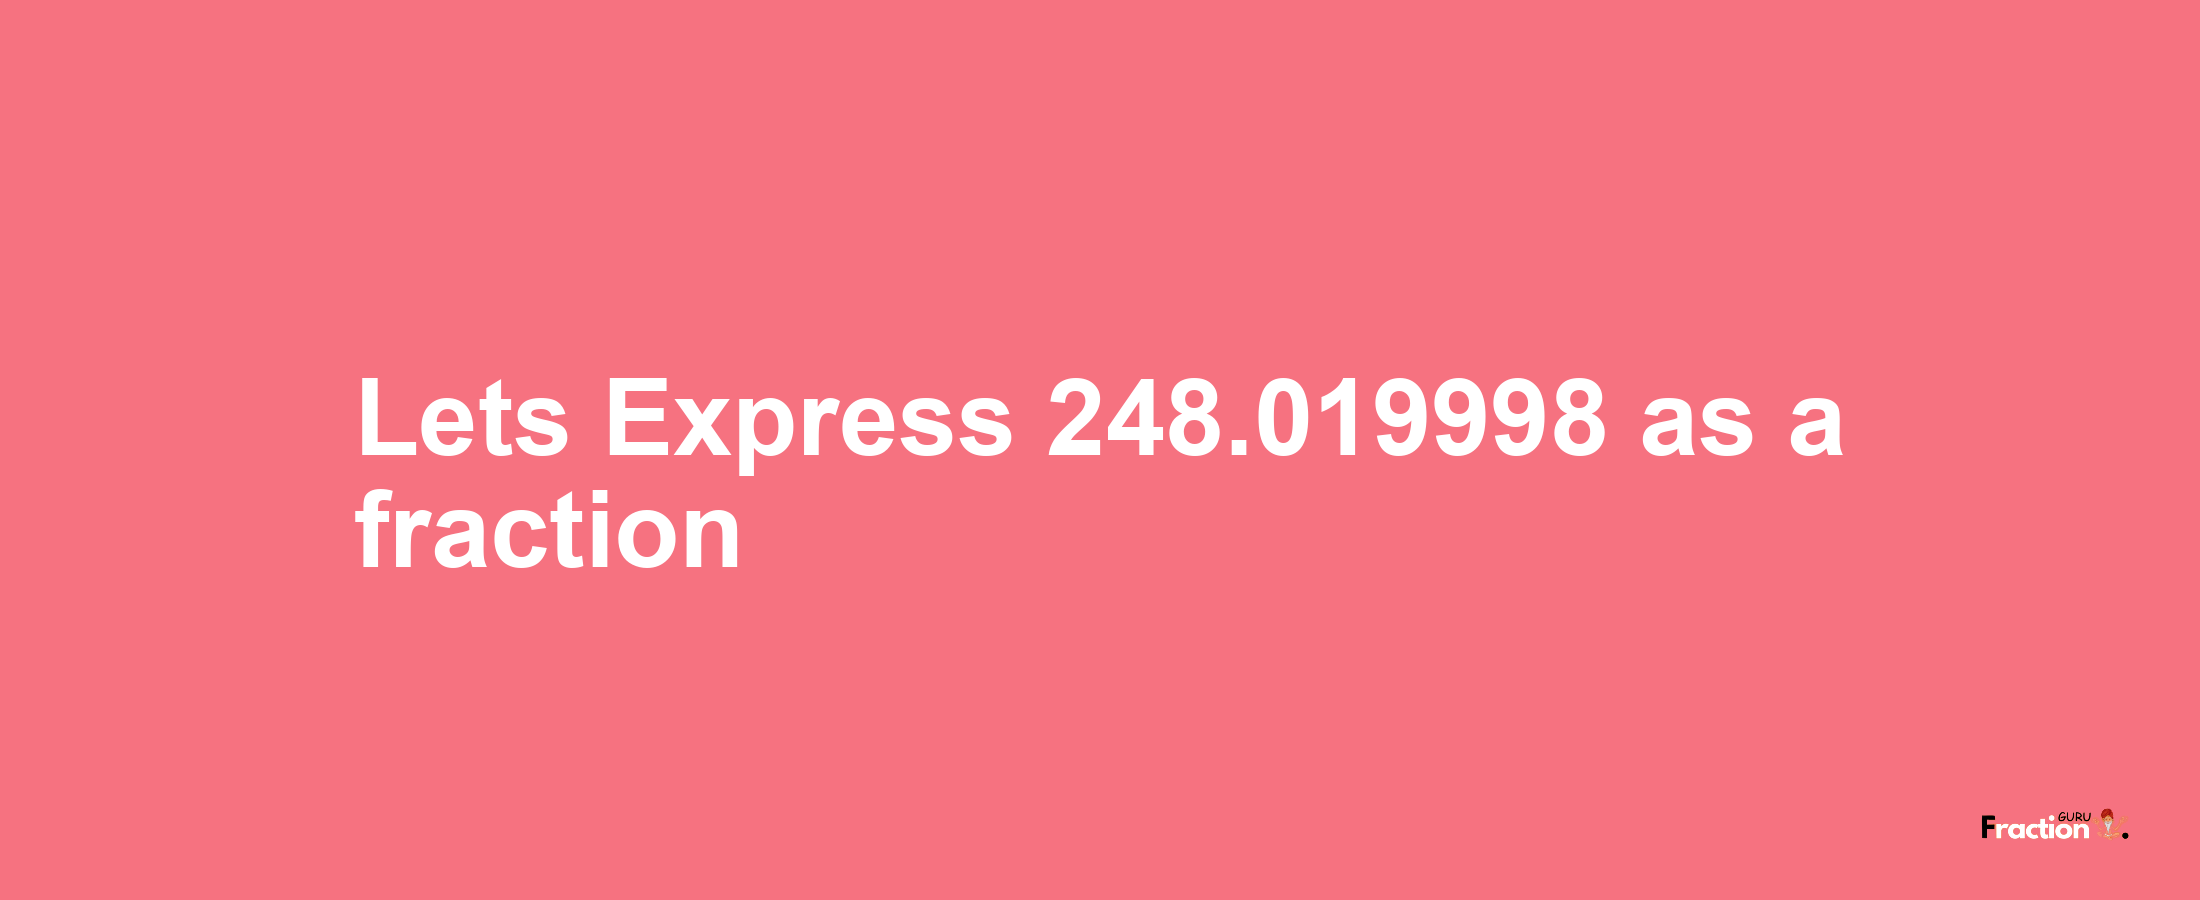 Lets Express 248.019998 as afraction